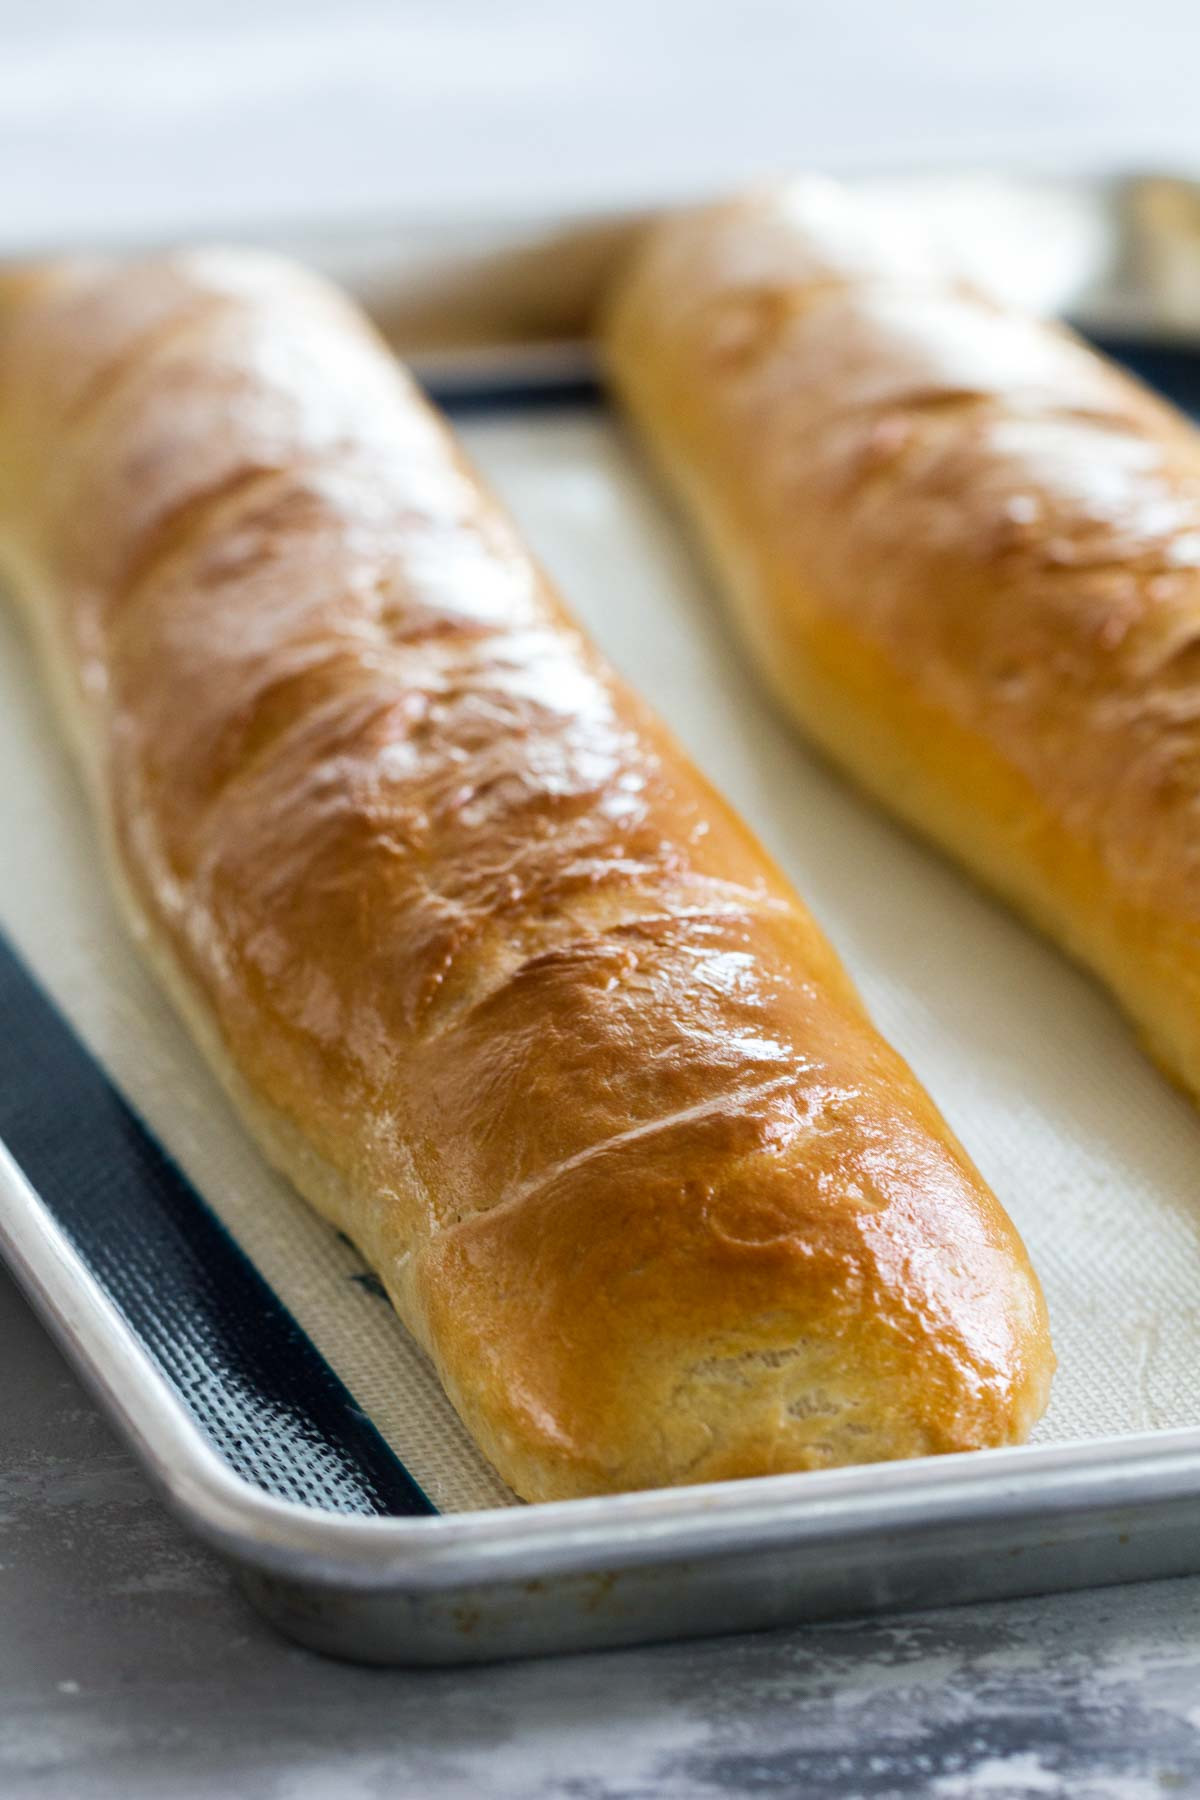 Simple French Bread Recipe Awesome Easy French Bread Recipe Make It at Home Taste and Tell